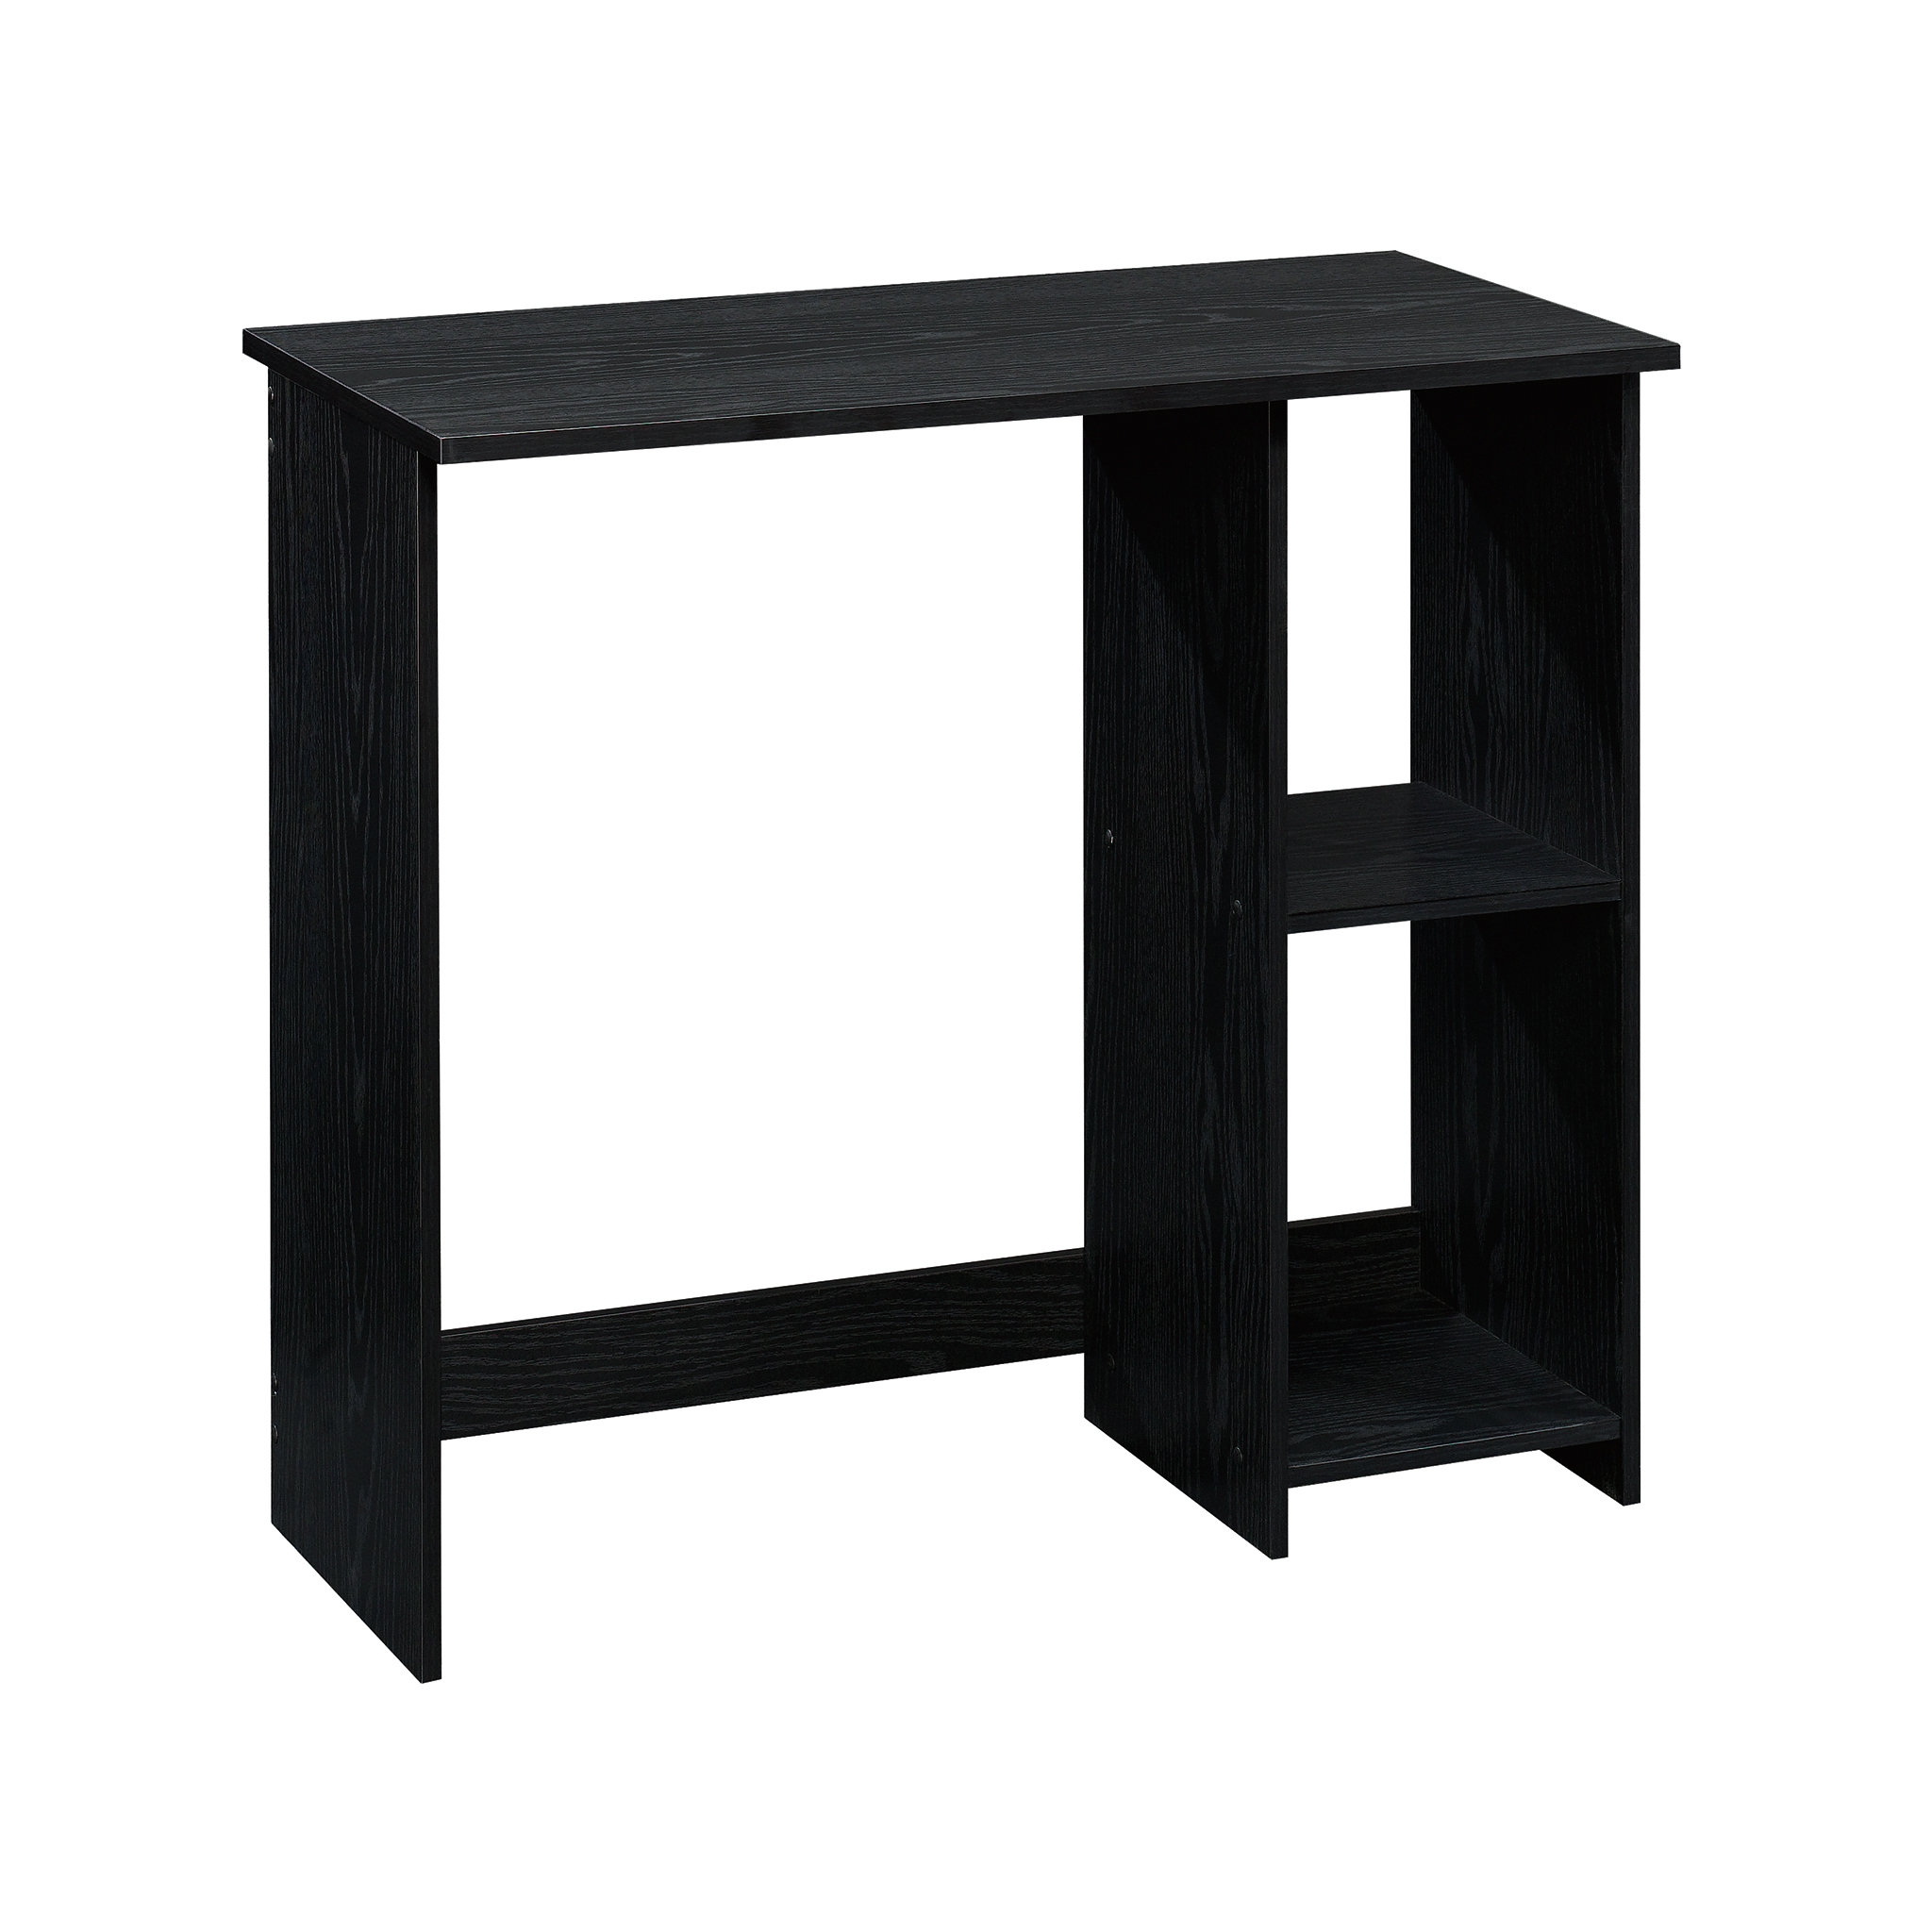 Mainstays Small Space Writing Desk with 2 Shelves, True Black Oak Finish - image 1 of 8